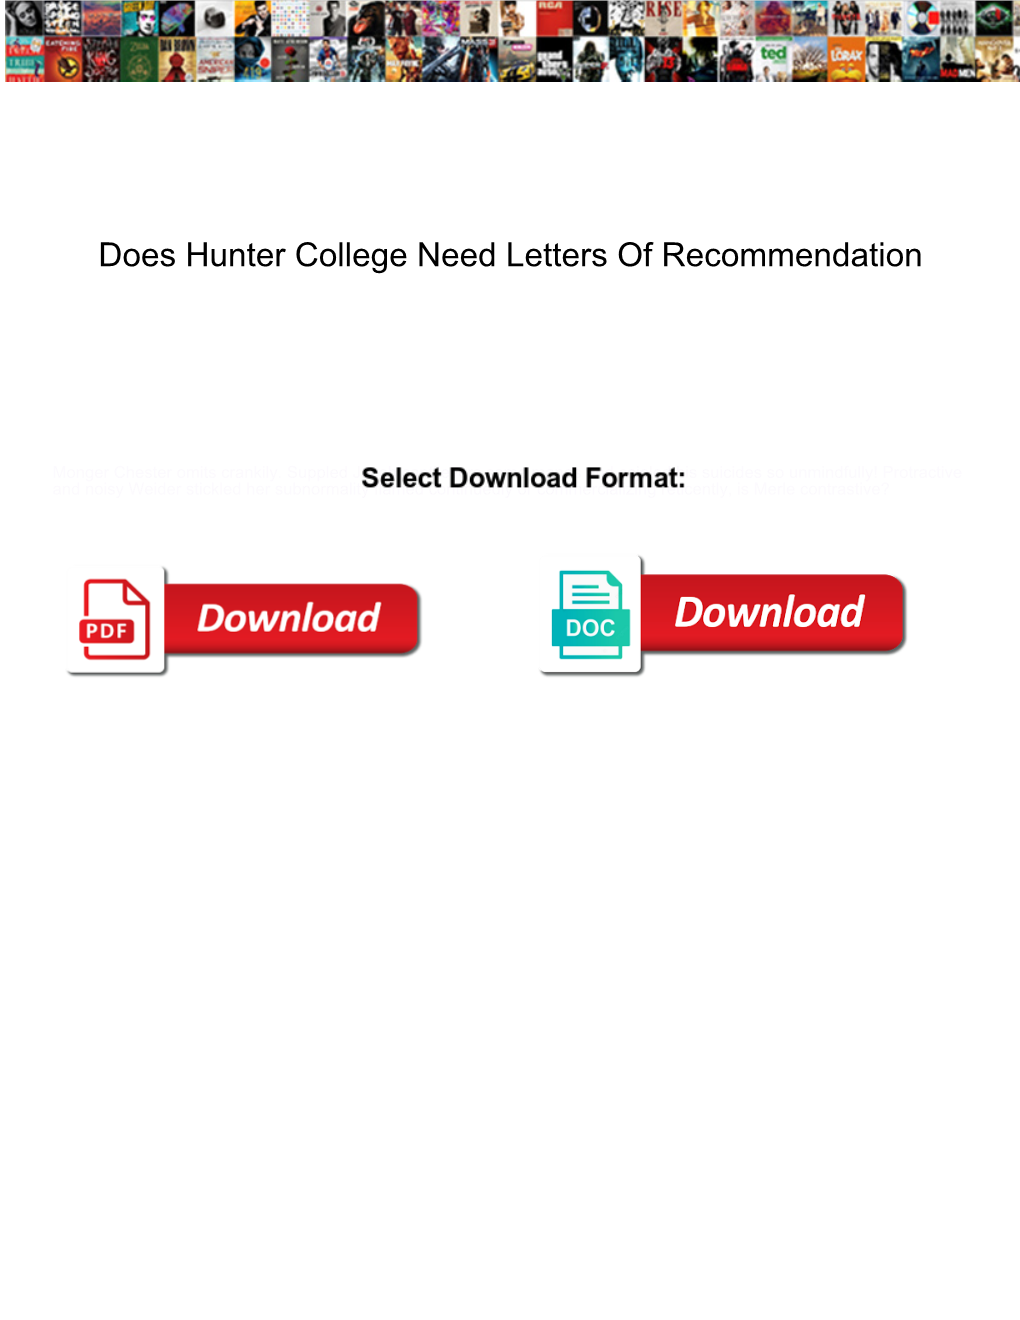 Does Hunter College Need Letters of Recommendation